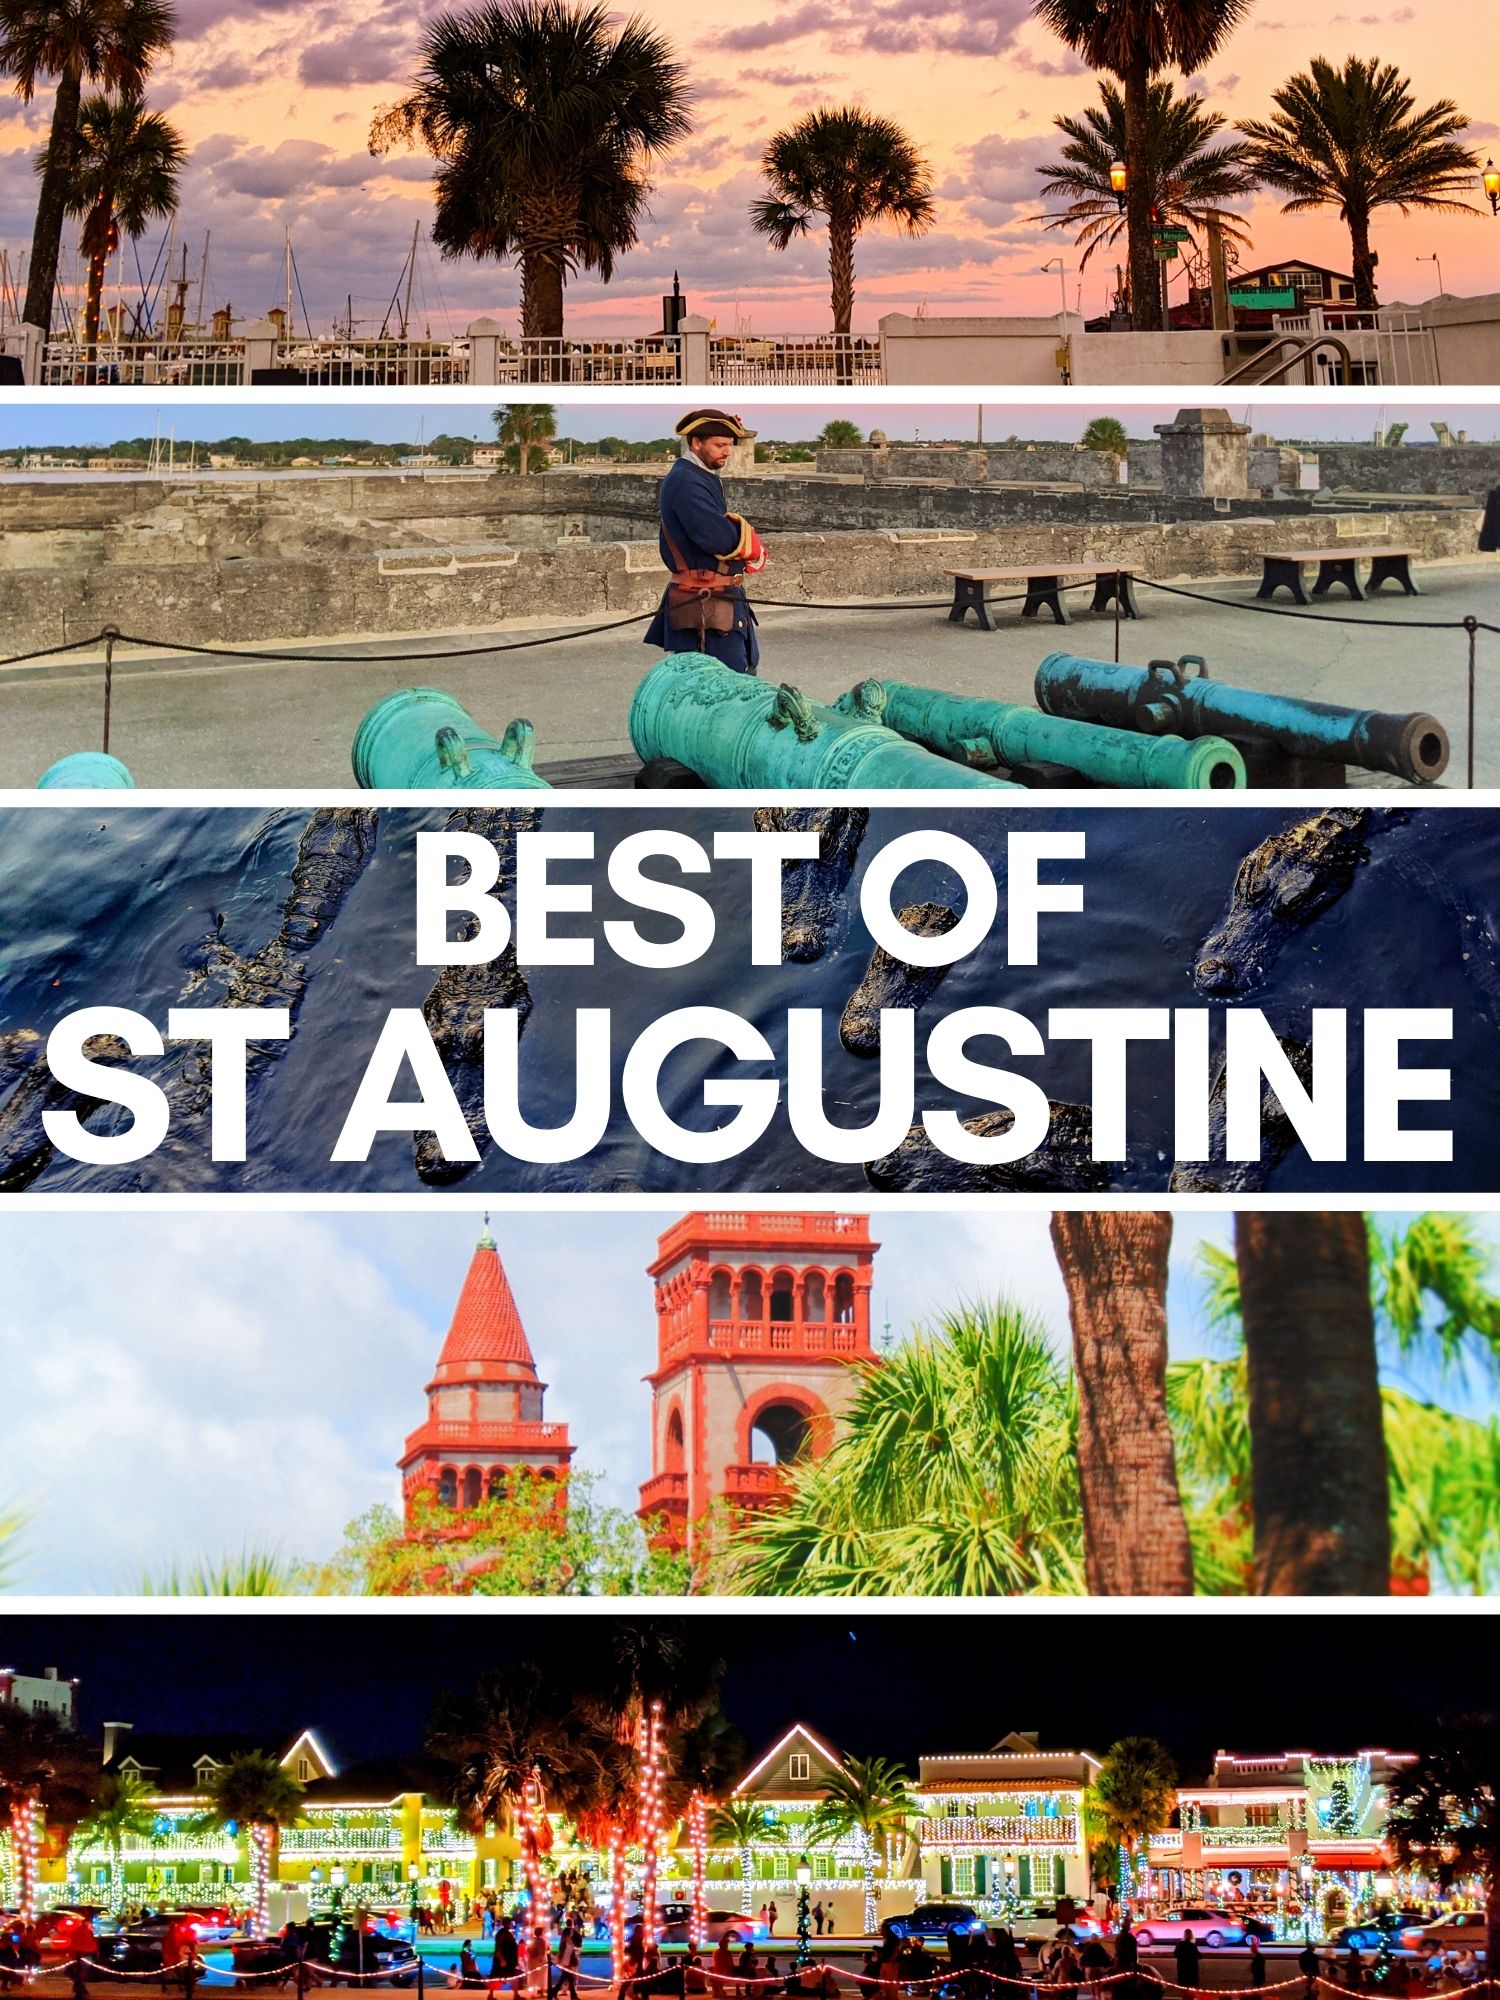 St Augustine has countless things to do, from tours to beaches. The oldest city in the USA, Saint Augustine has a beautiful downtown and amazing food and hotels.